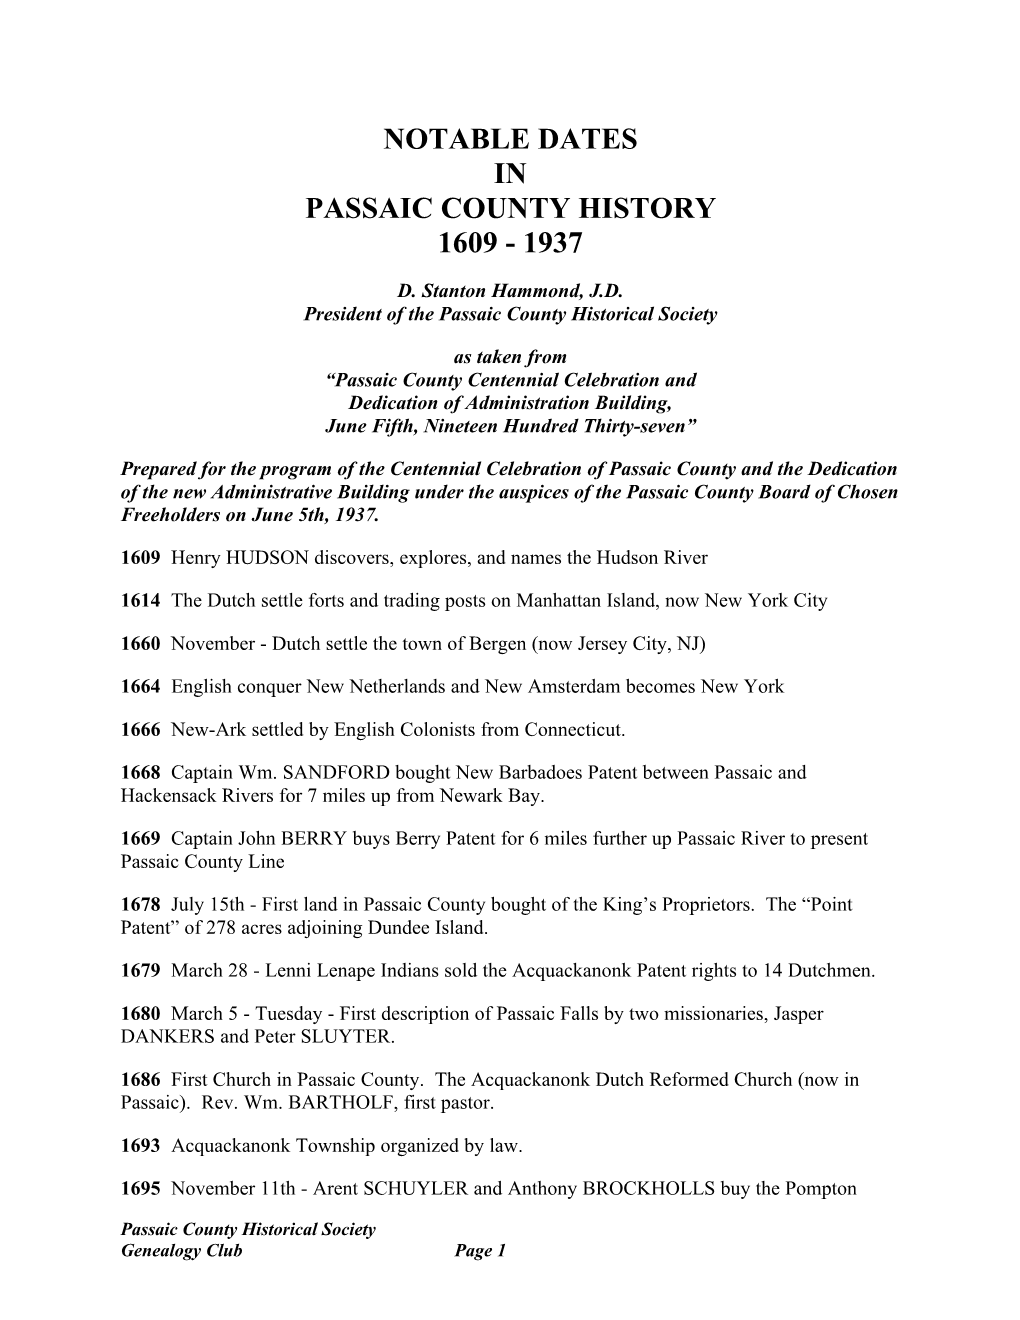 Notable Dates in Passaic County History 1609 - 1937